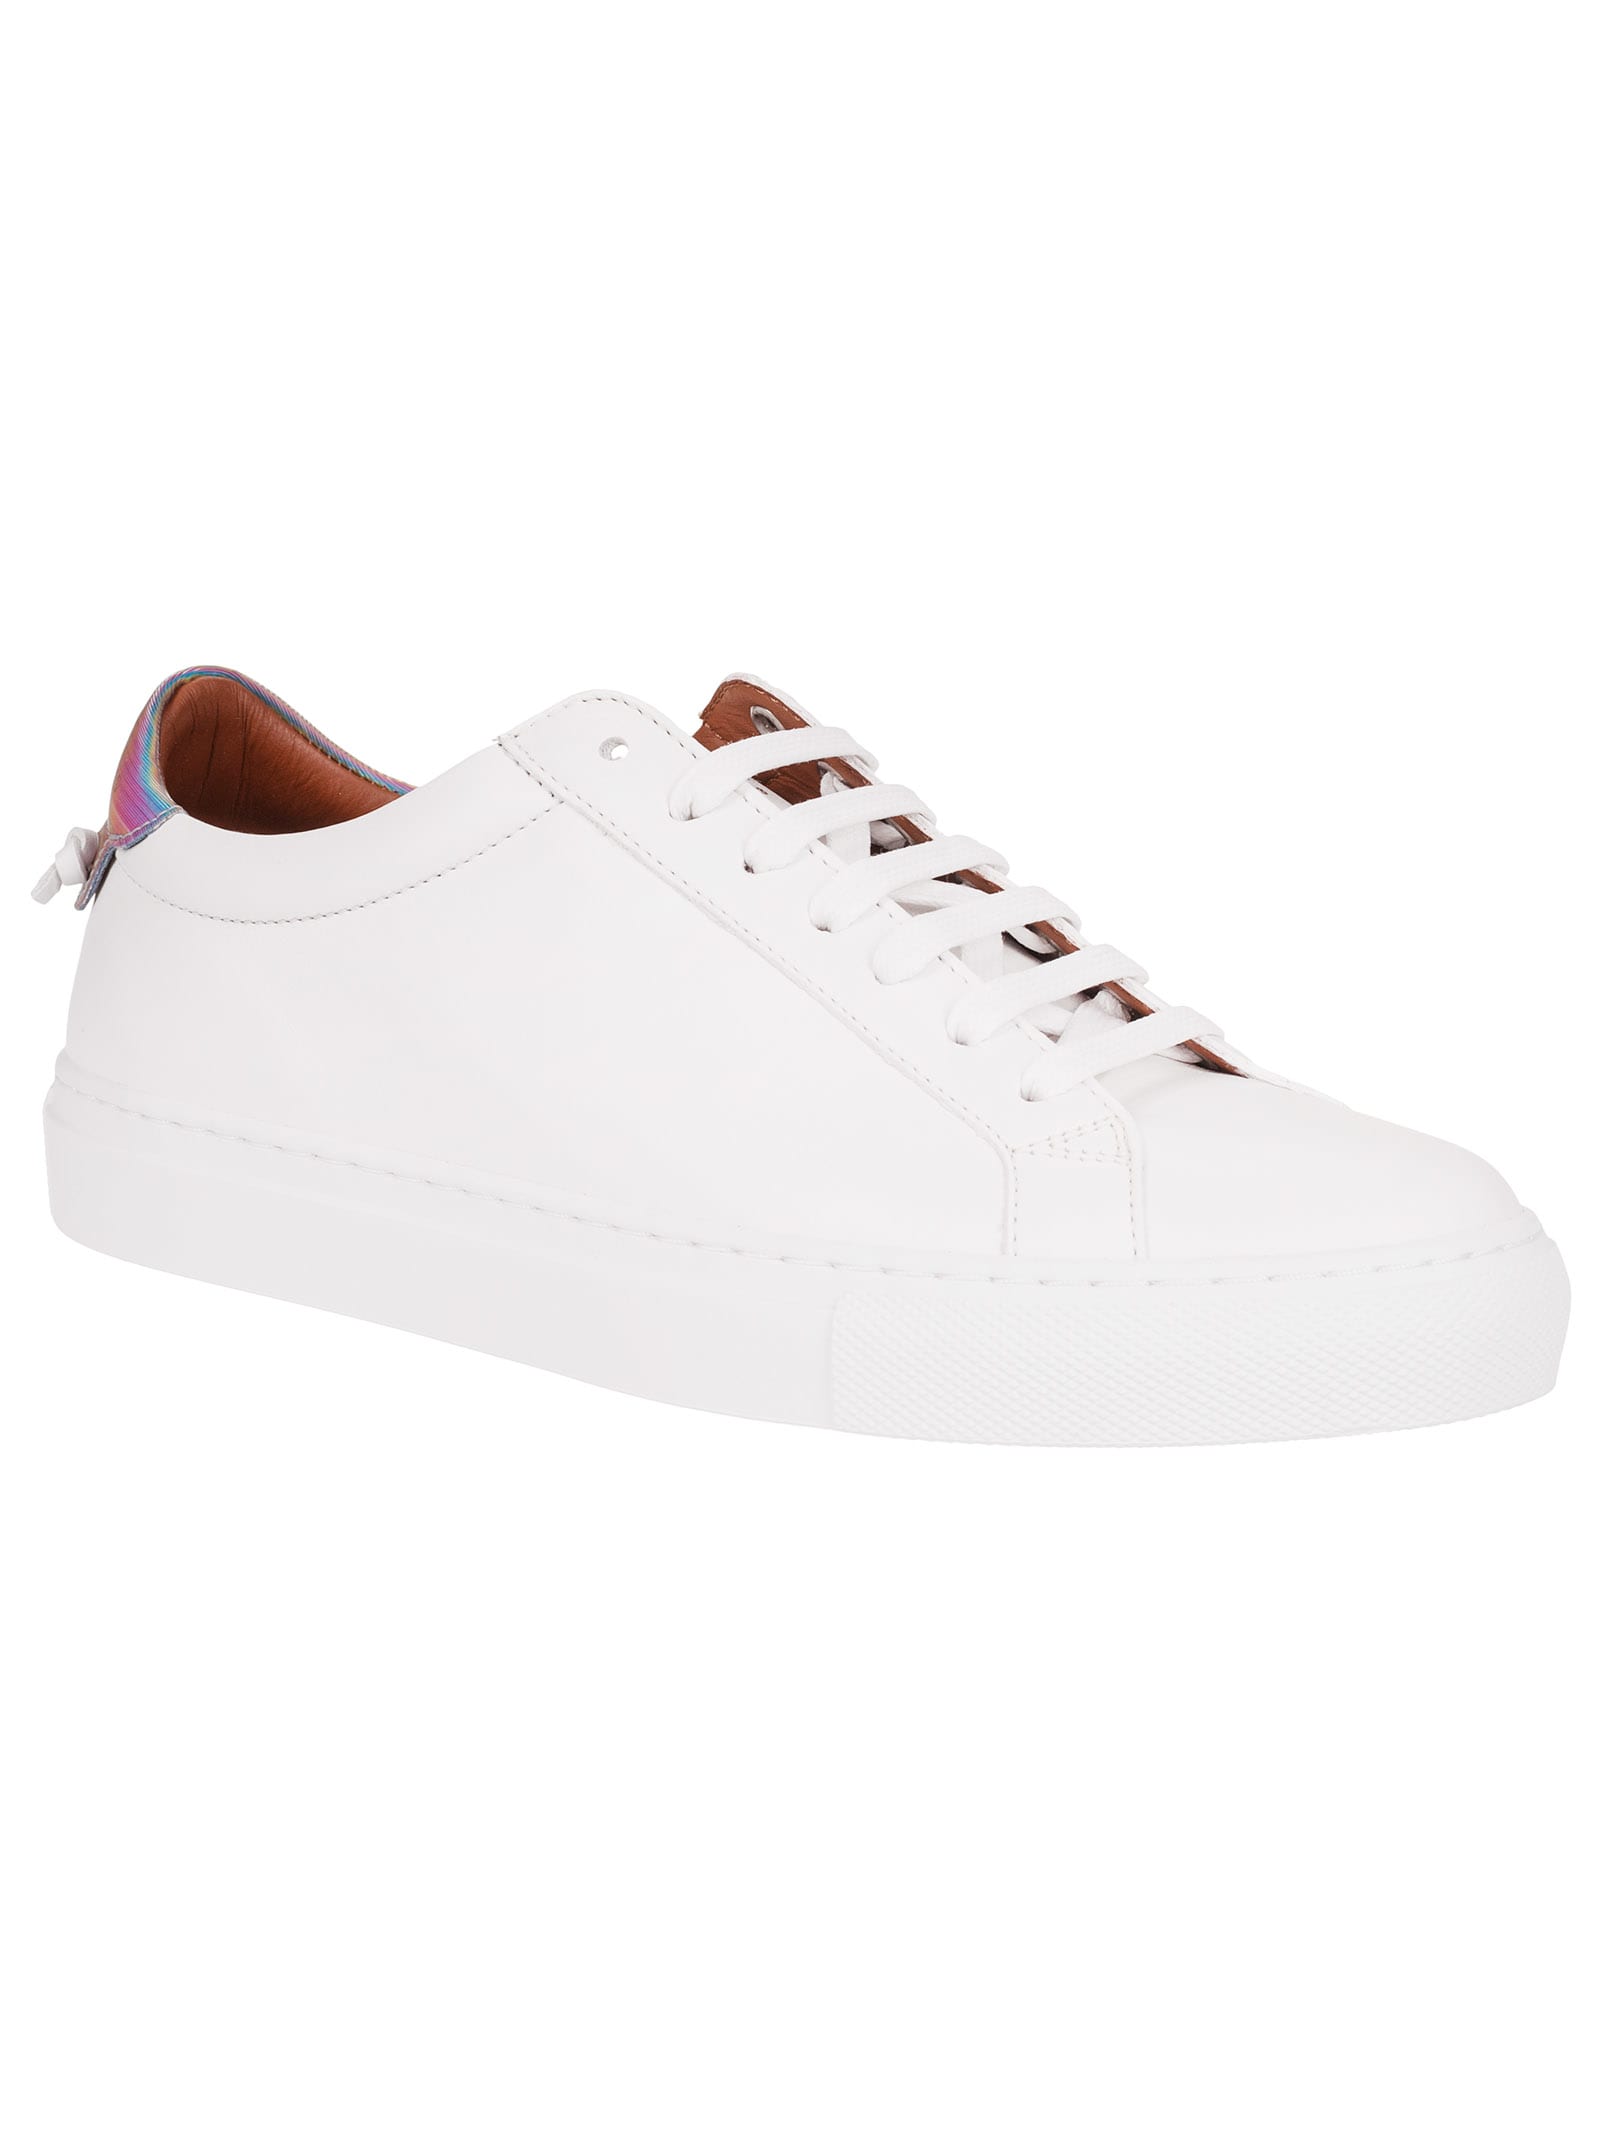 GIVENCHY URBAN STREET SNEAKERS,11308370